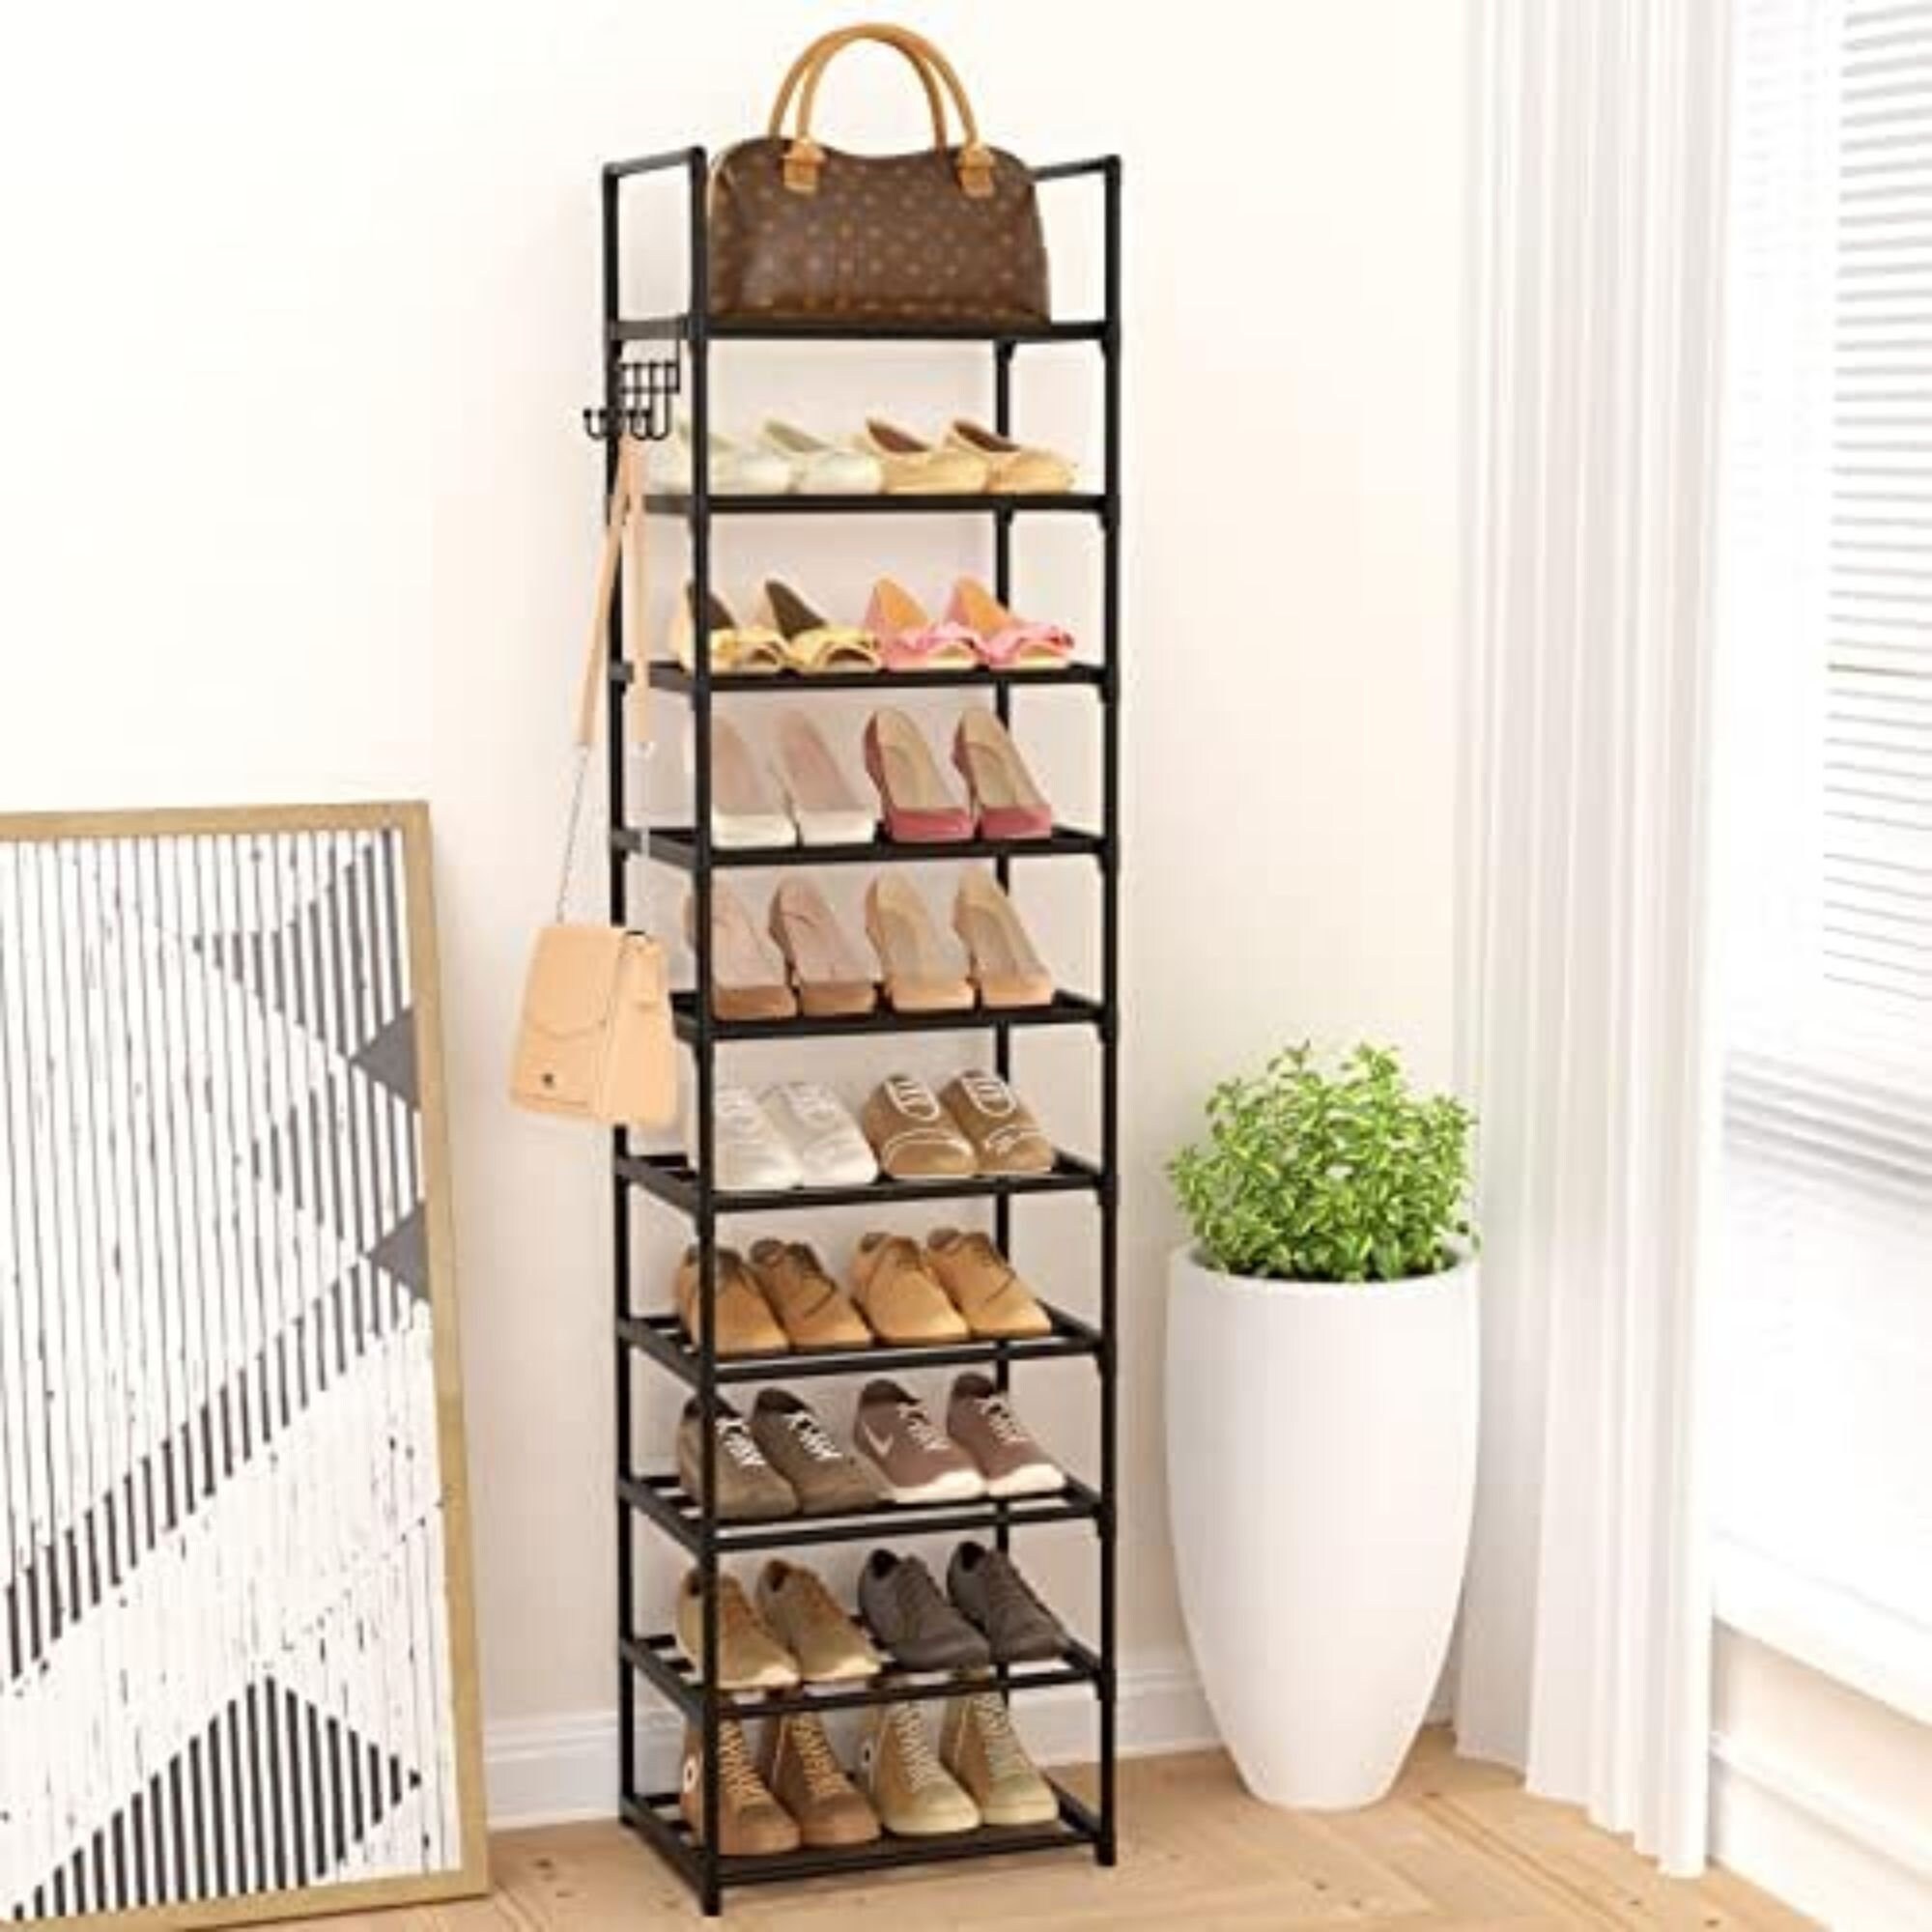 LANTEFUL 10 Tiers Tall Shoe Rack 20-25 Pairs Boots Organizer Storage Sturdy  Narrow Shoe Shelf for Entryway, Closets with Hooks